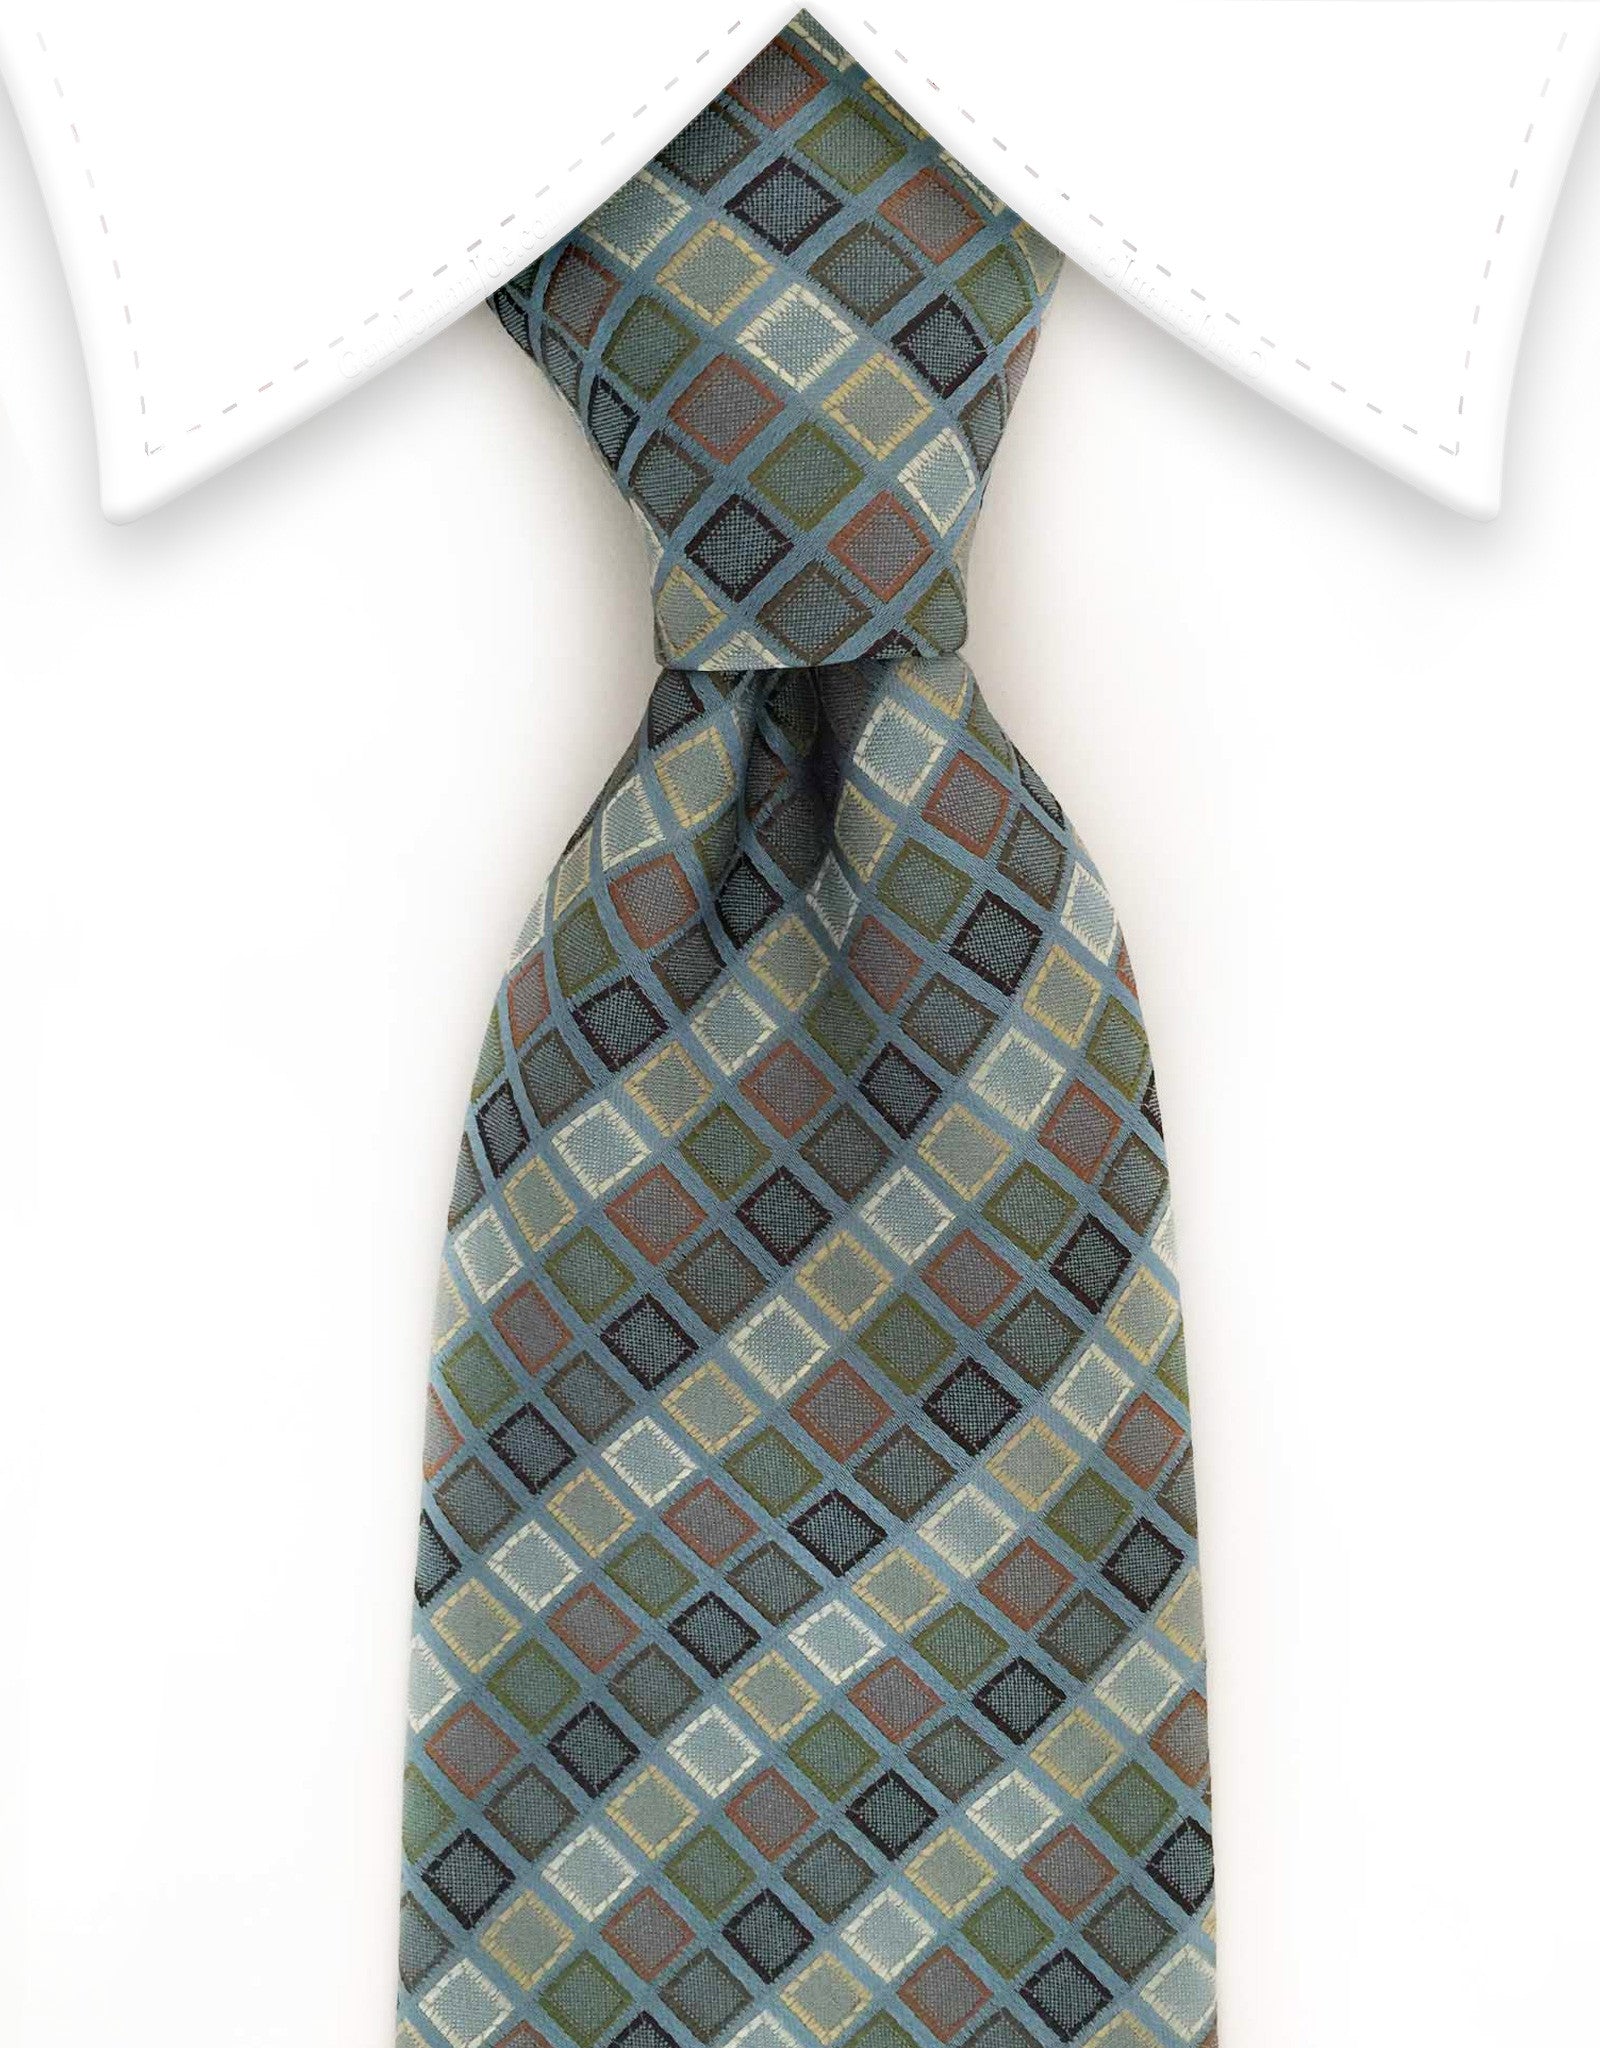 Steel blue gray tie with multi-colored squares